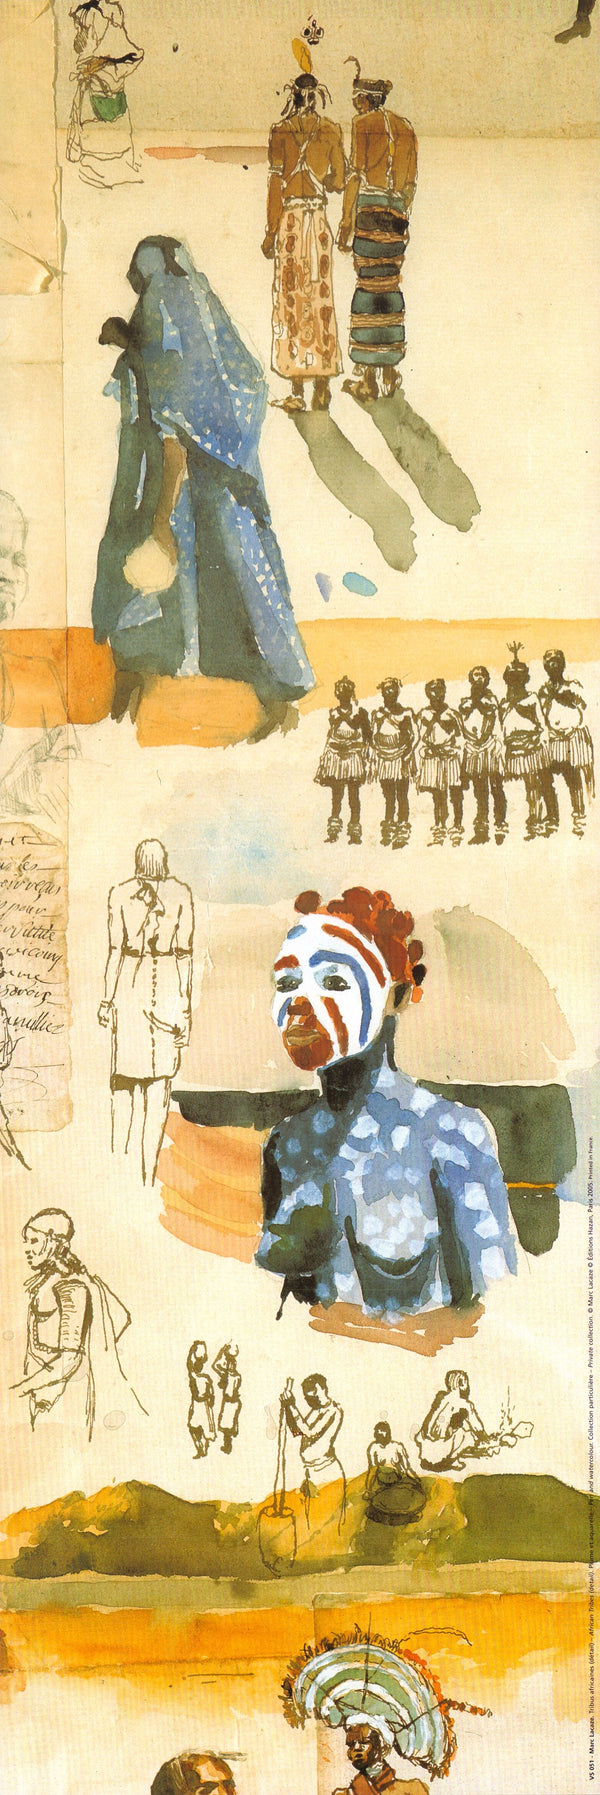 African Tribes (detail) by Marc Lacaze - 8 X 24 Inches (Art Print)